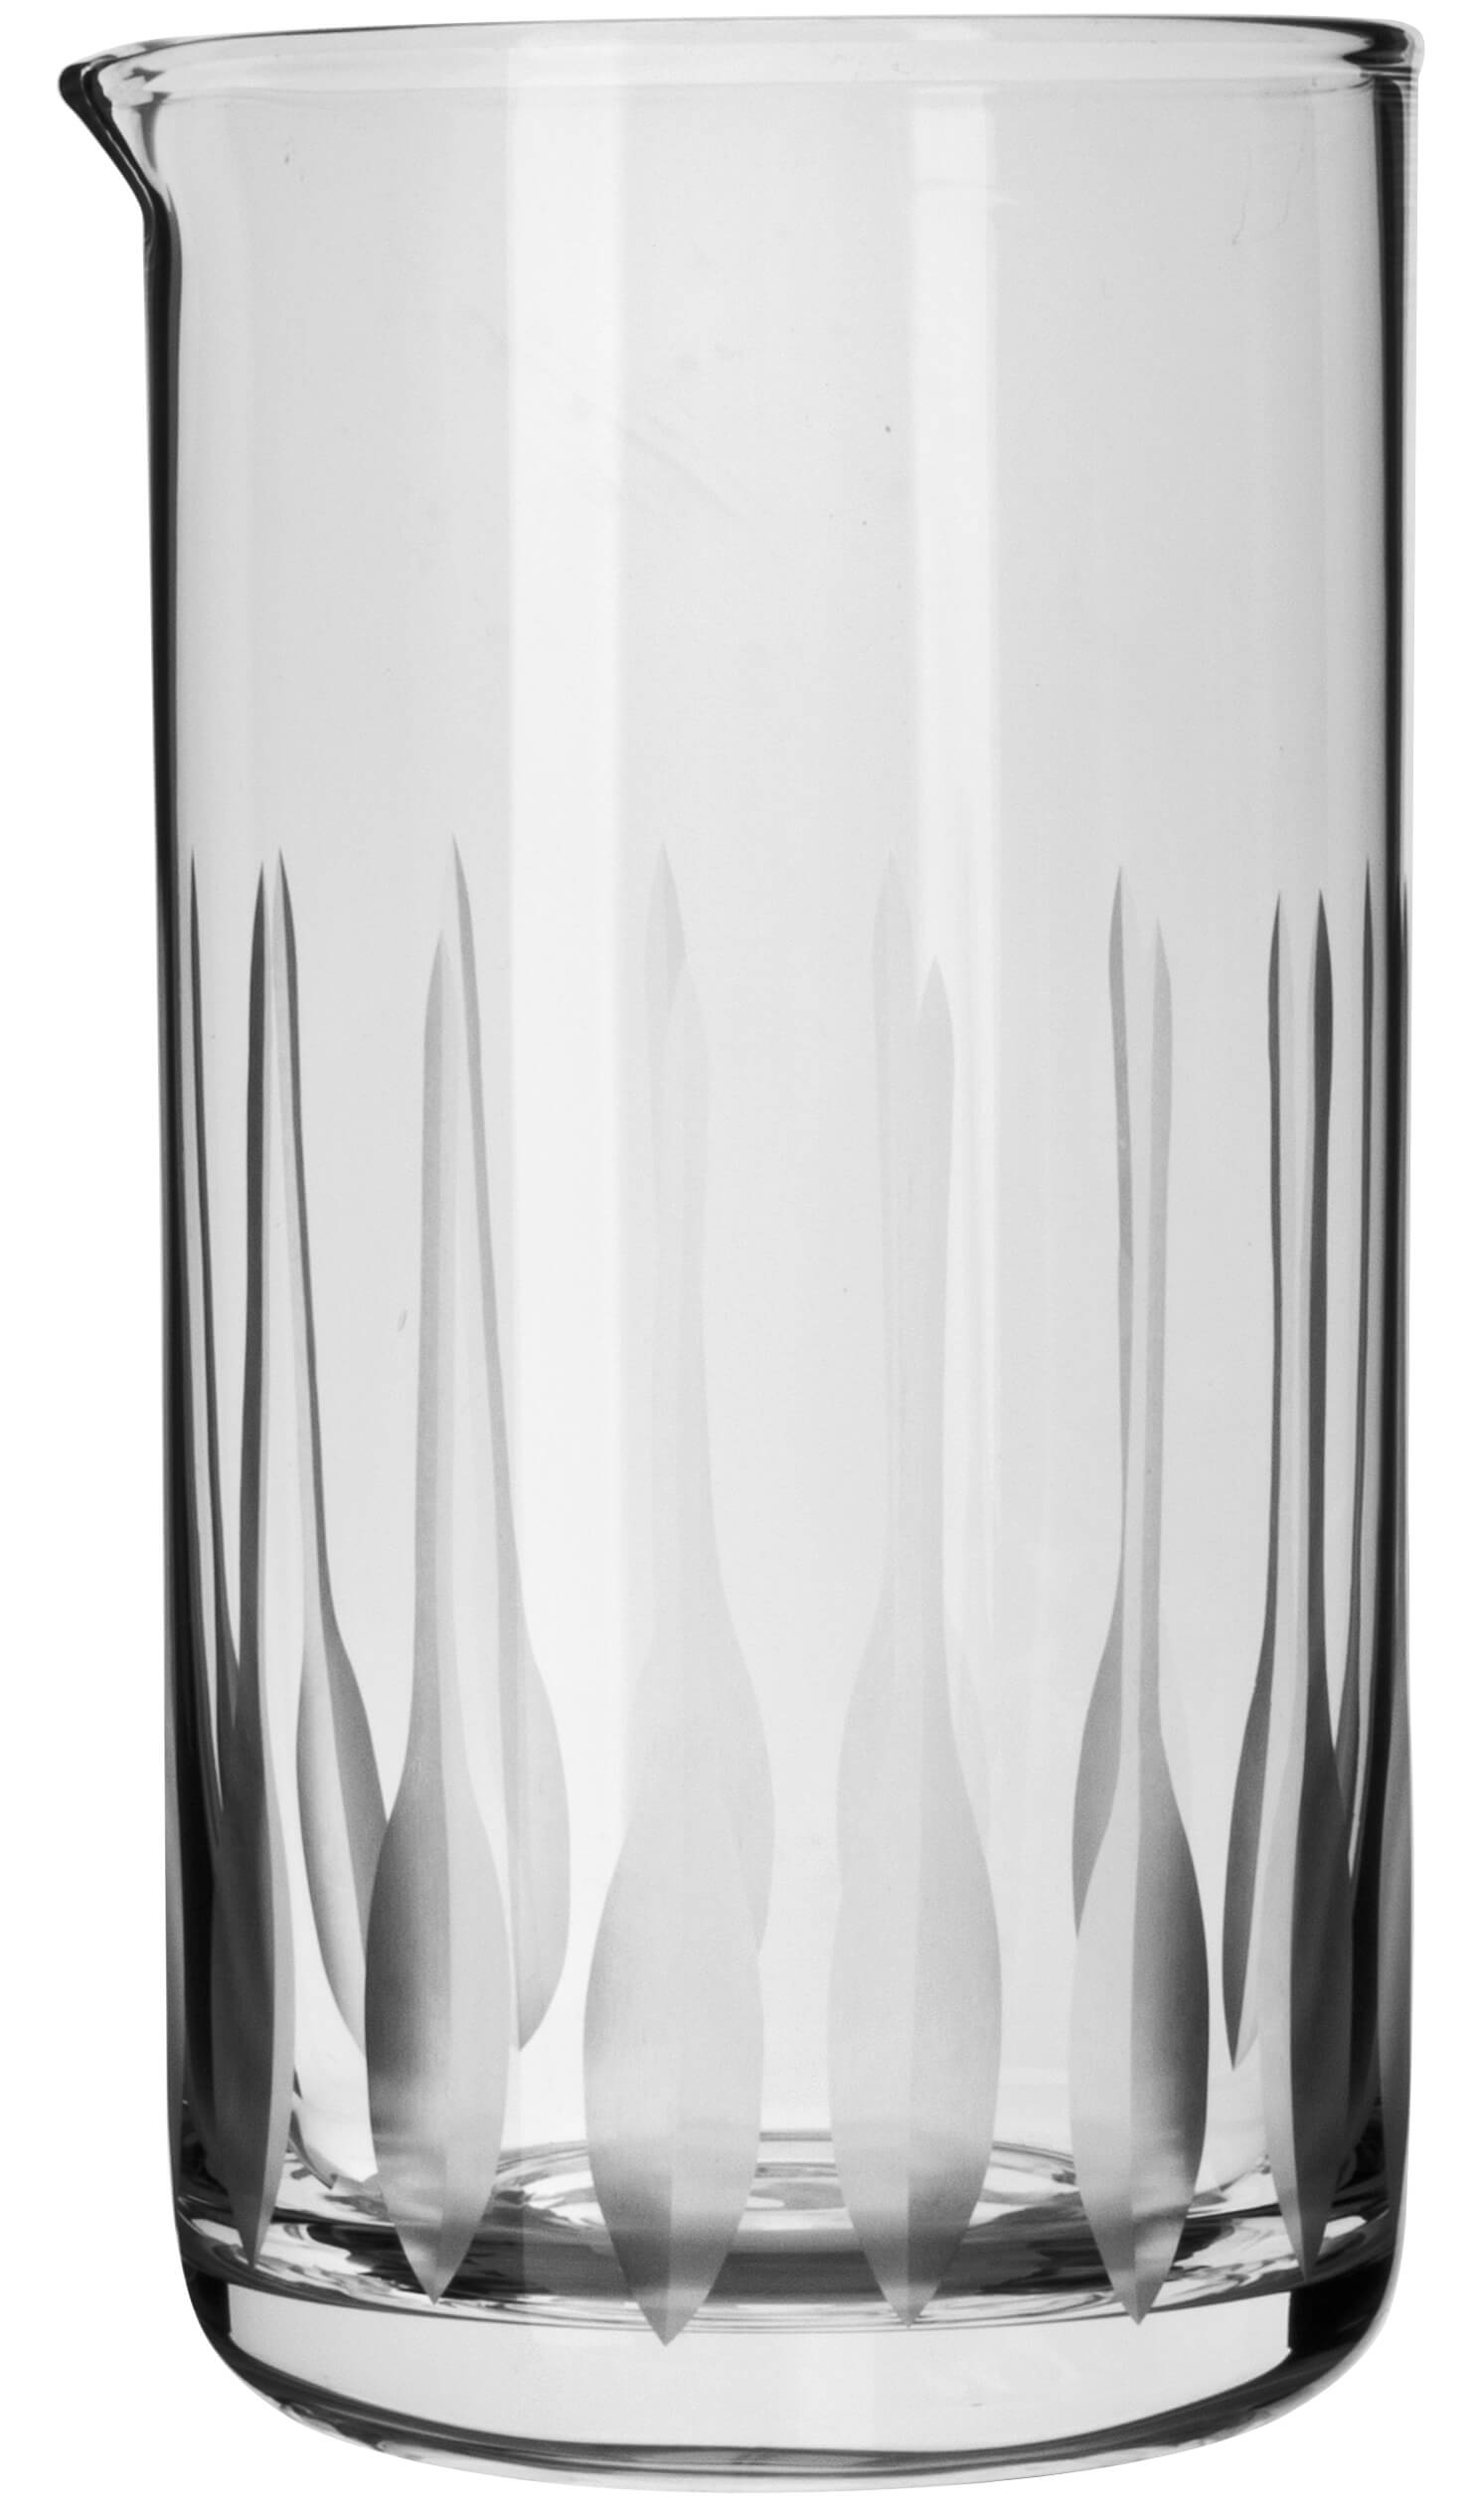 Mixing glass Paddle tall with pouring lip, Prime Bar - 840ml